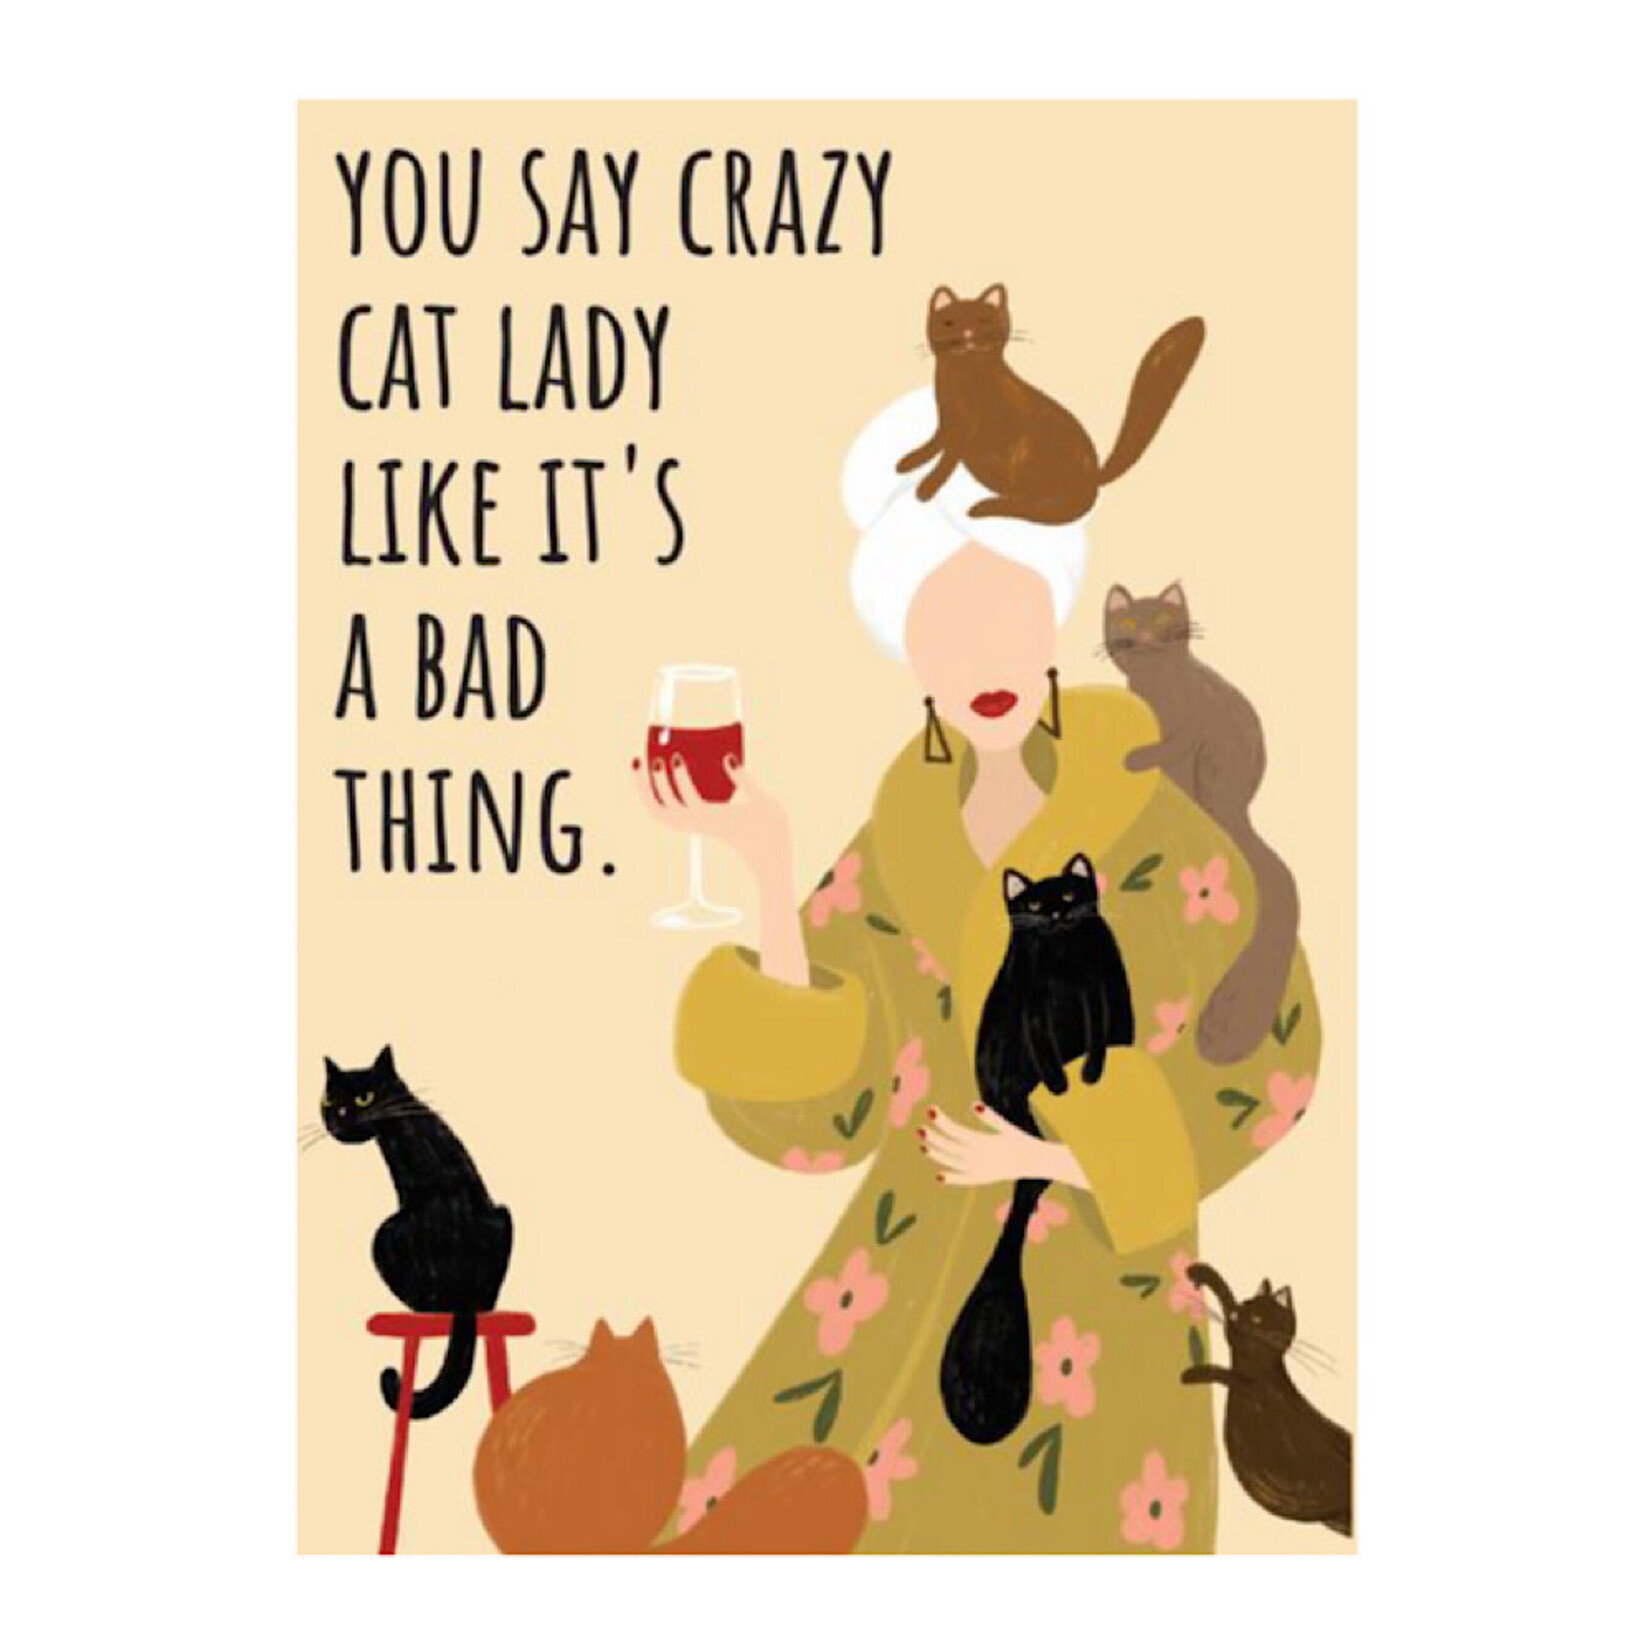 Magnet - You say crazy cat lady like it’s a bad thing